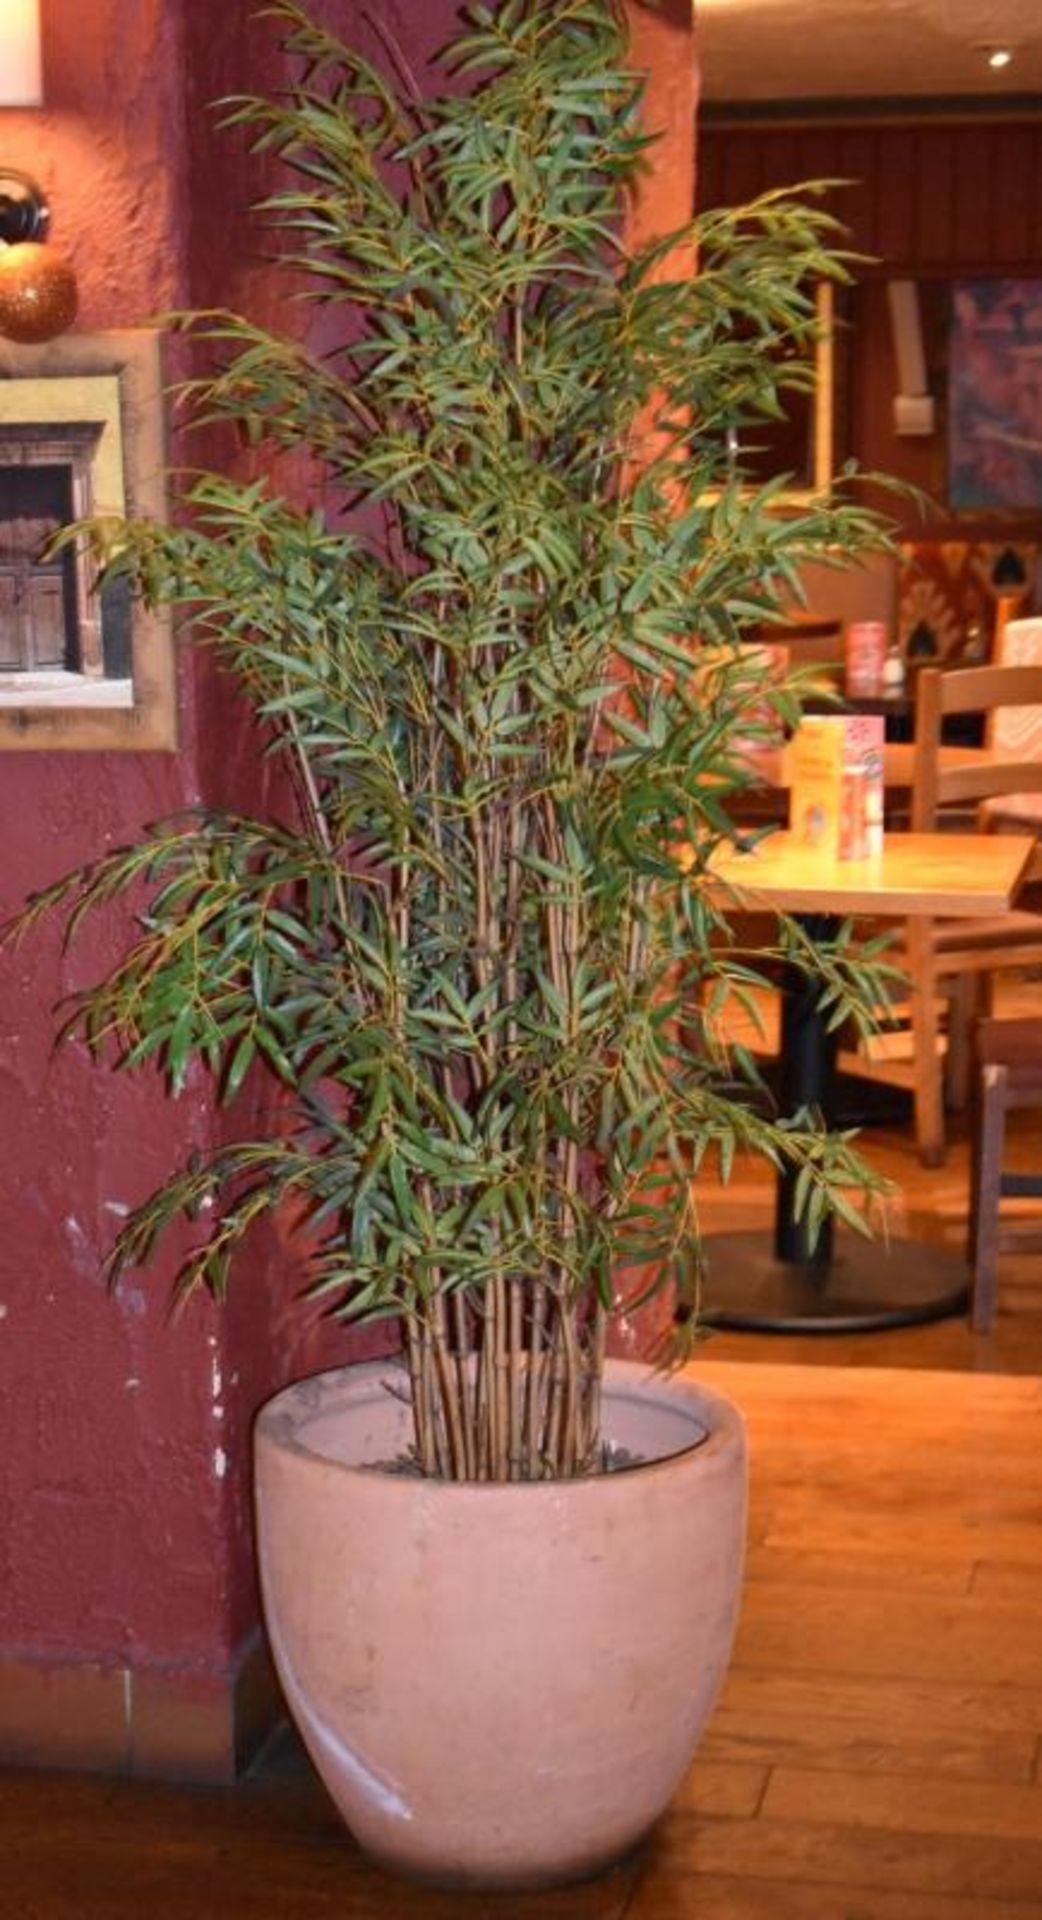 2 x Indoor Potted Artificial  Plants - Both Stand Approx 6ft Tall - CL461 - Location: London - Image 3 of 3